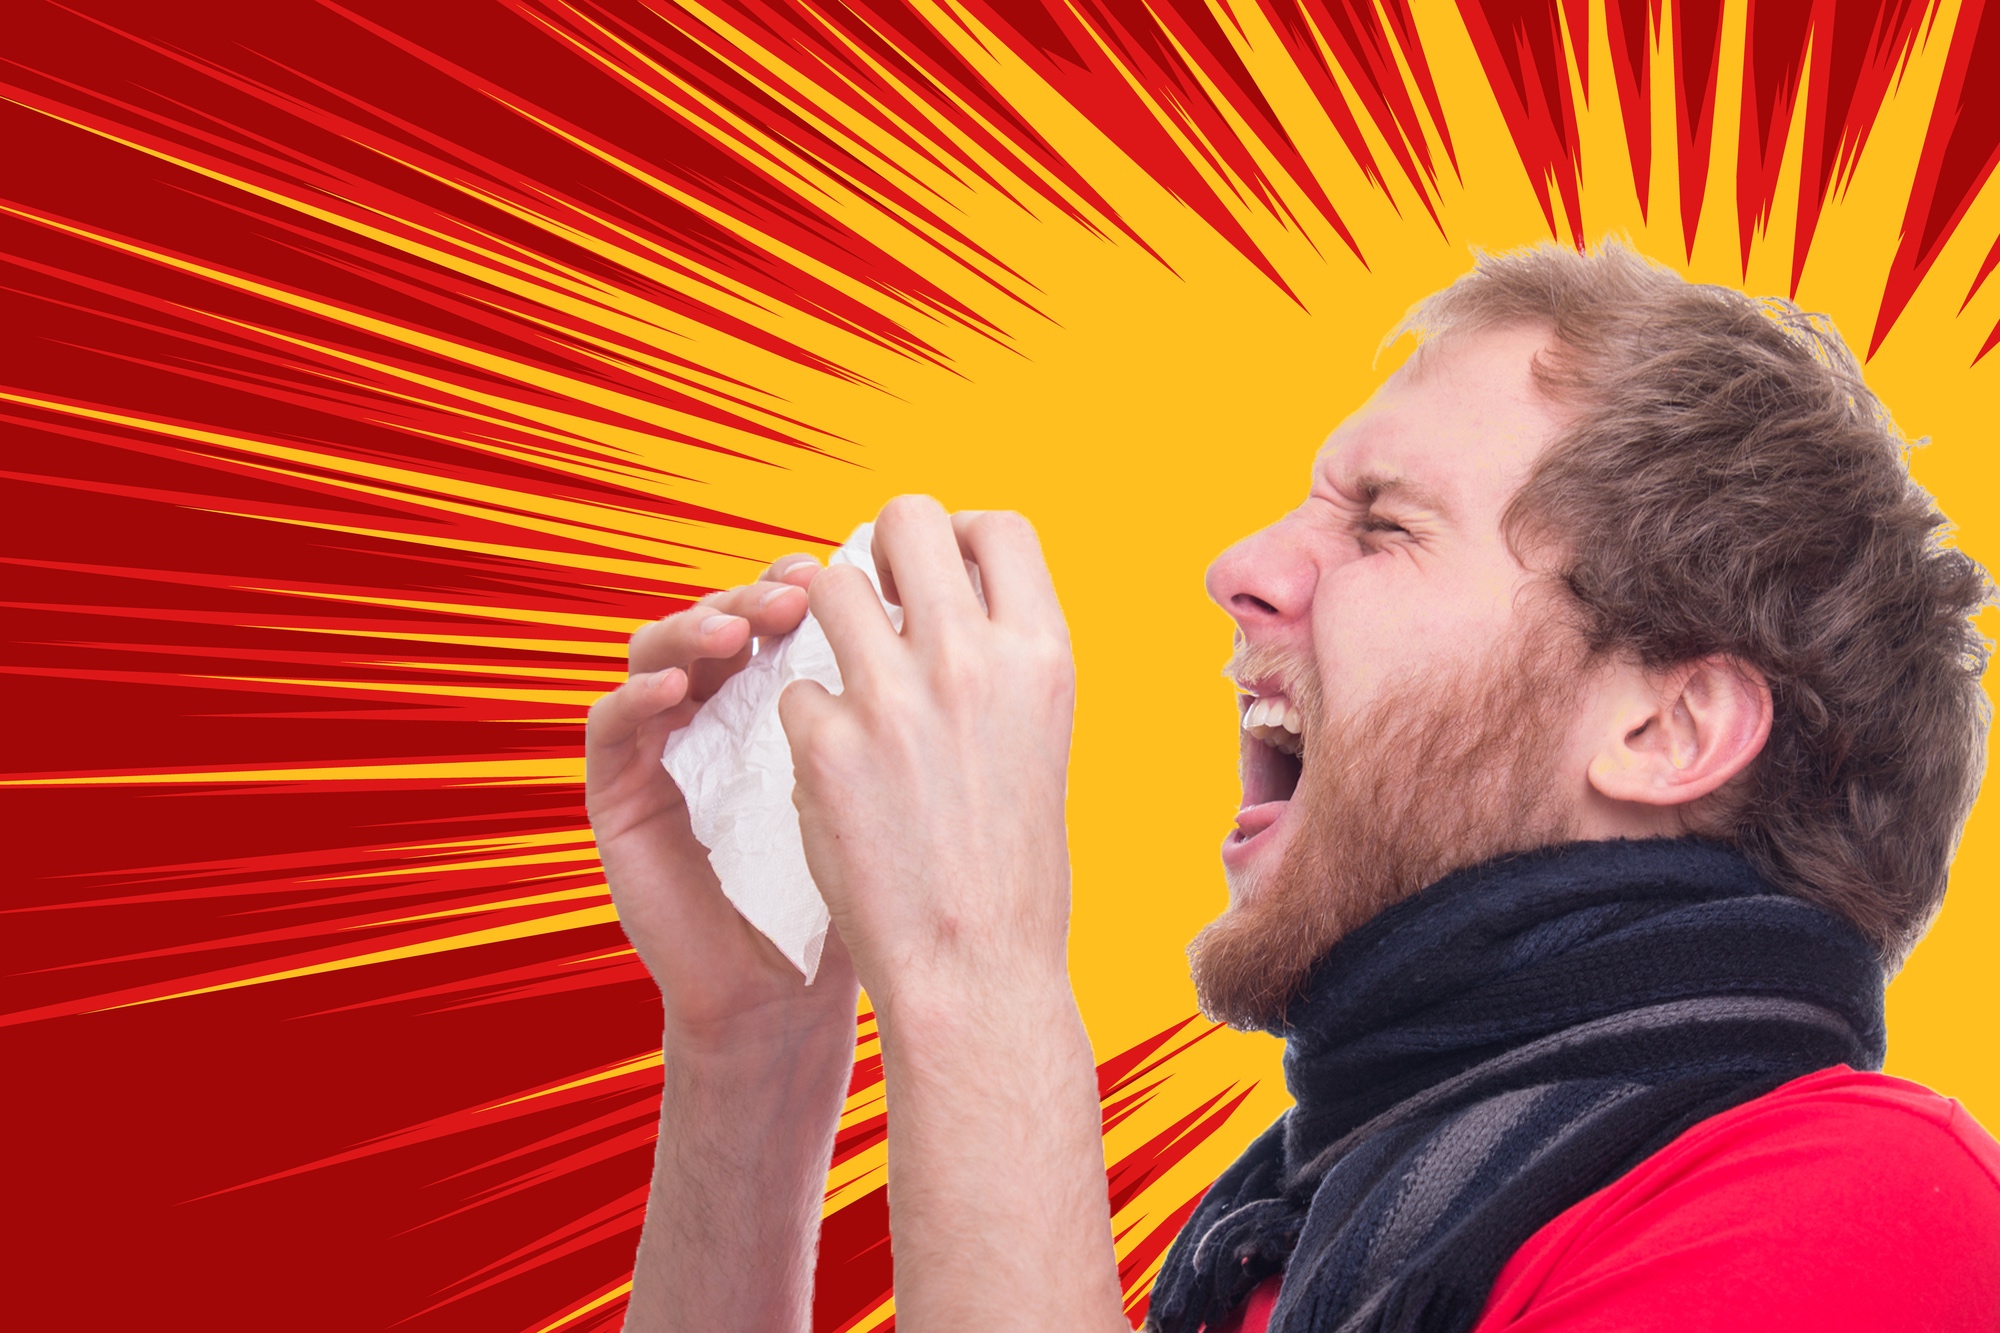 Why do some people sneeze so loudly?